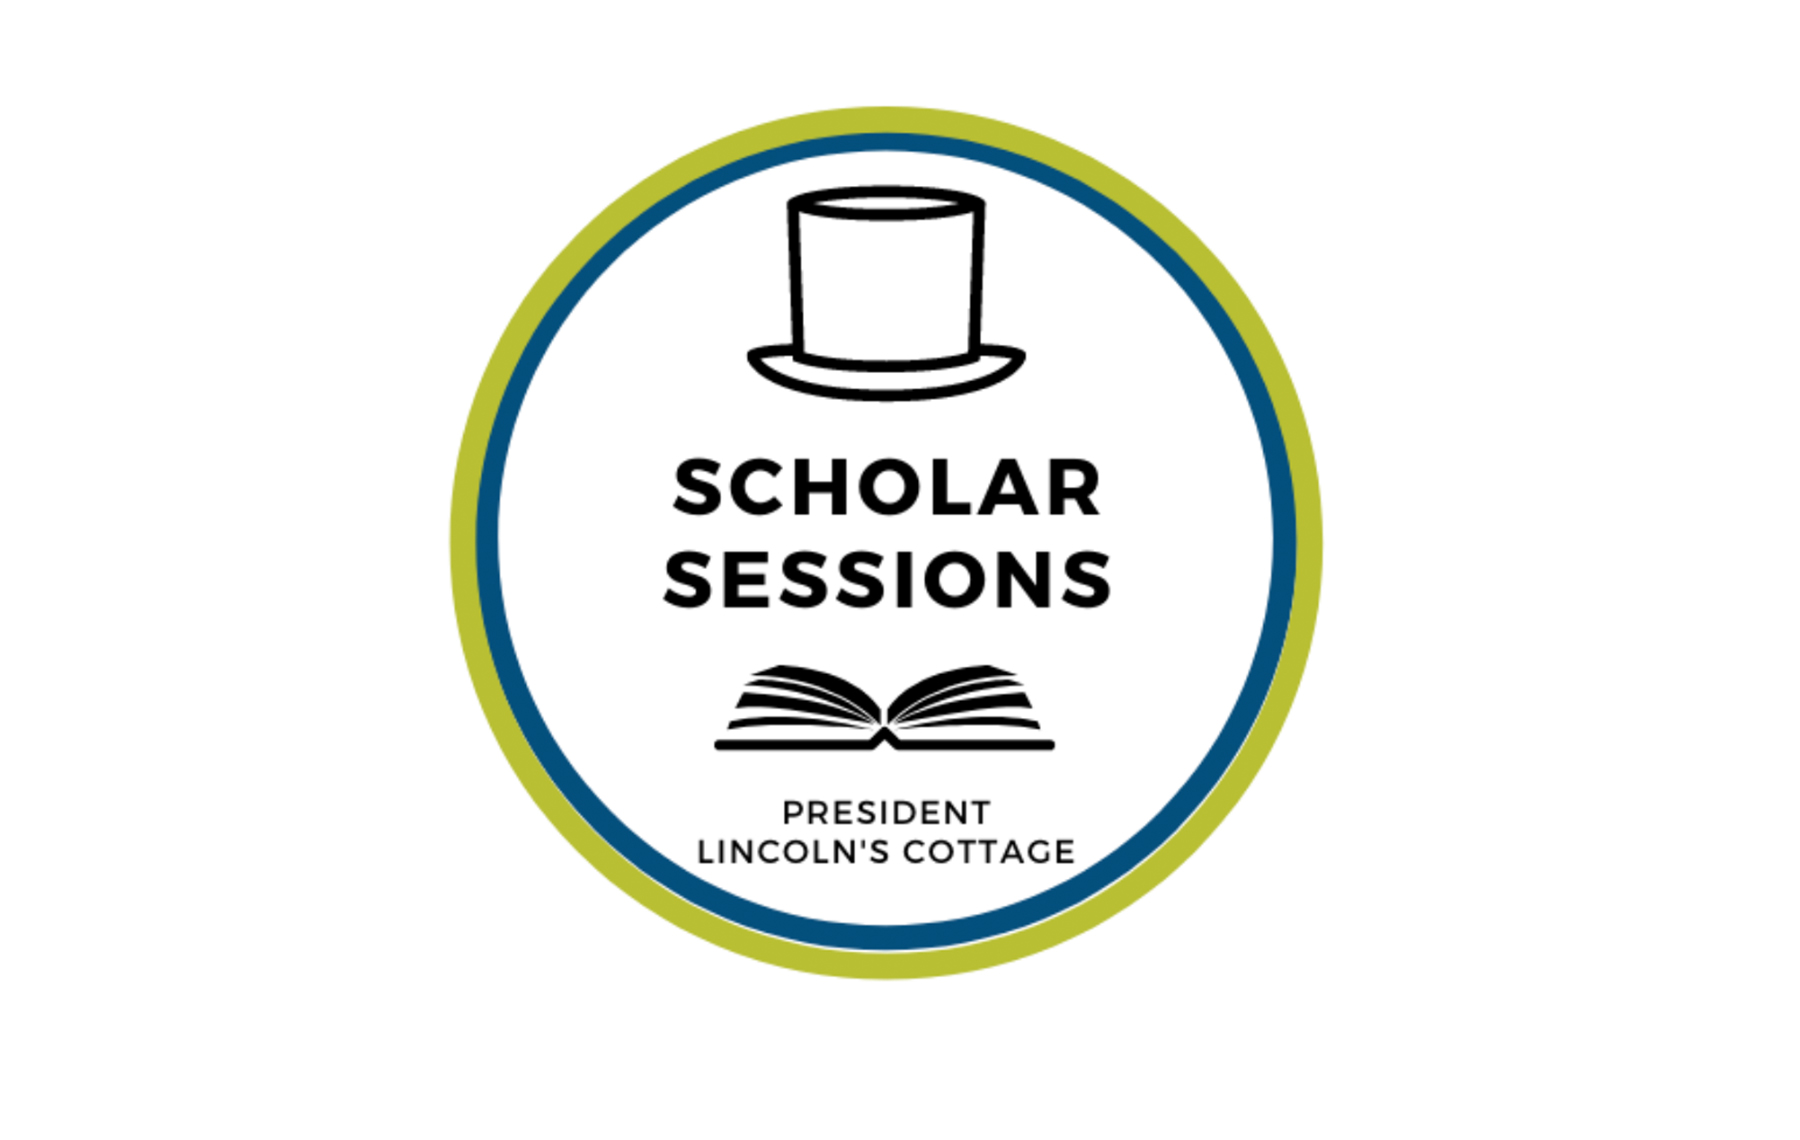 Lincoln Cottage Scholar Sessions